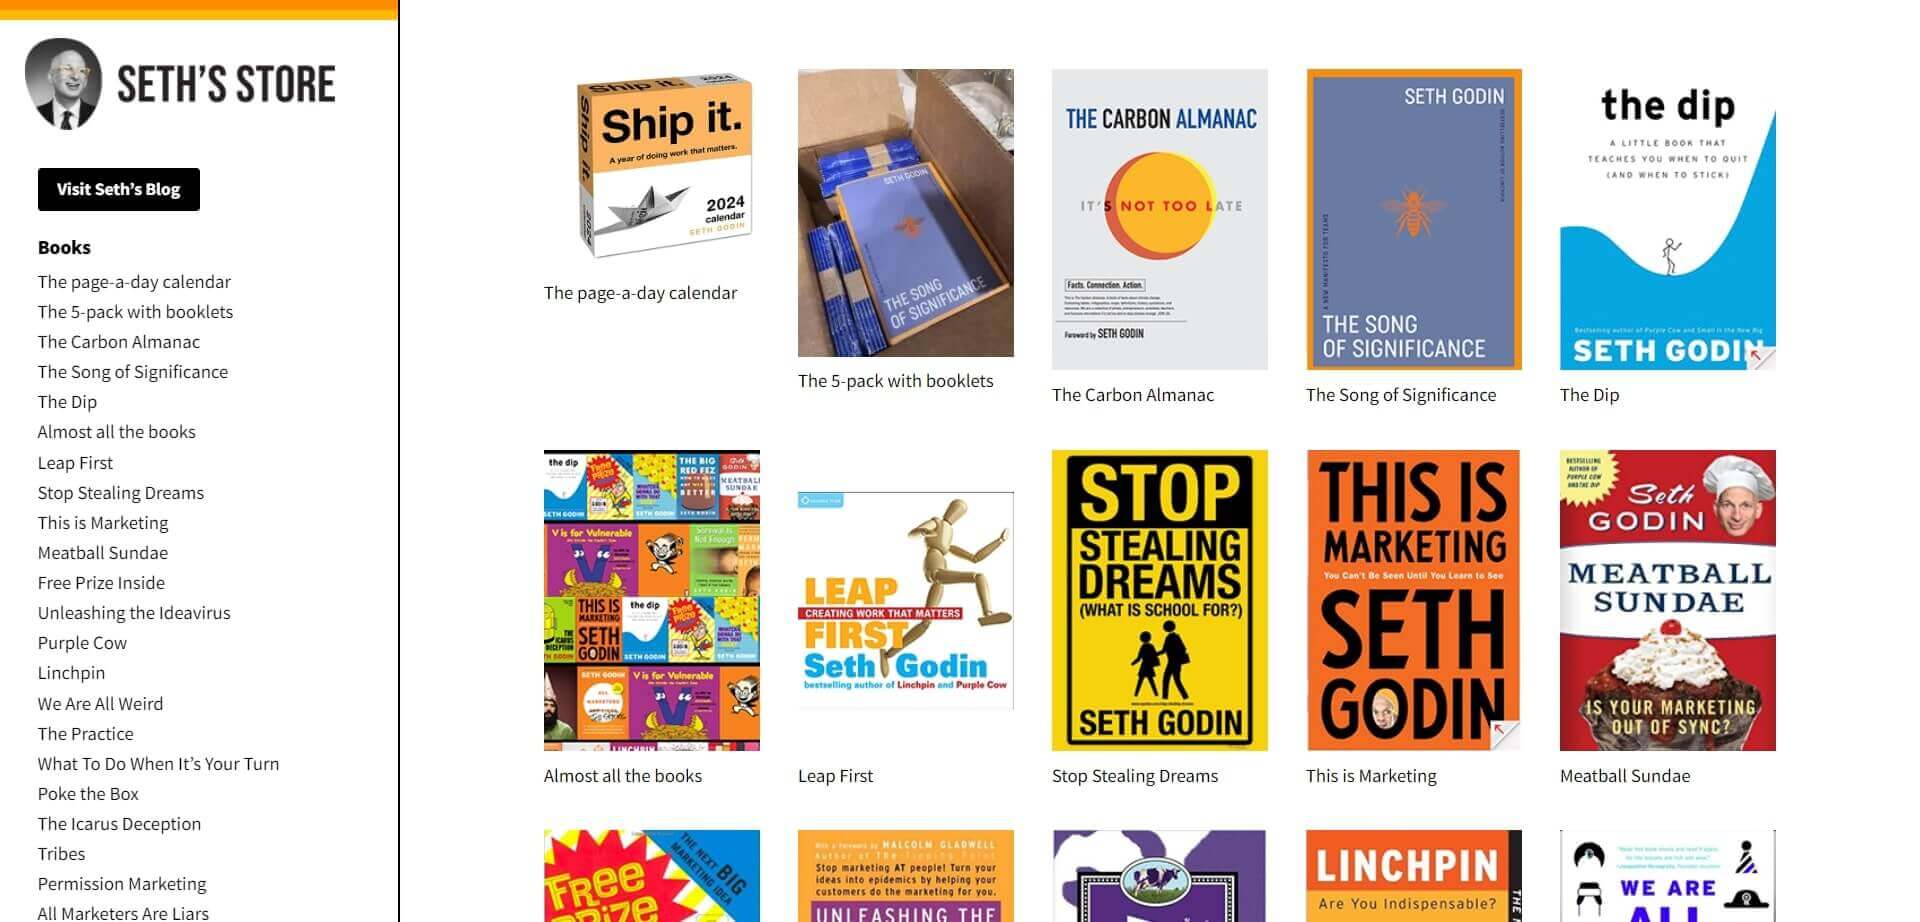 A screenshot of Seth Godin's online book store featuring several colorful book covers.